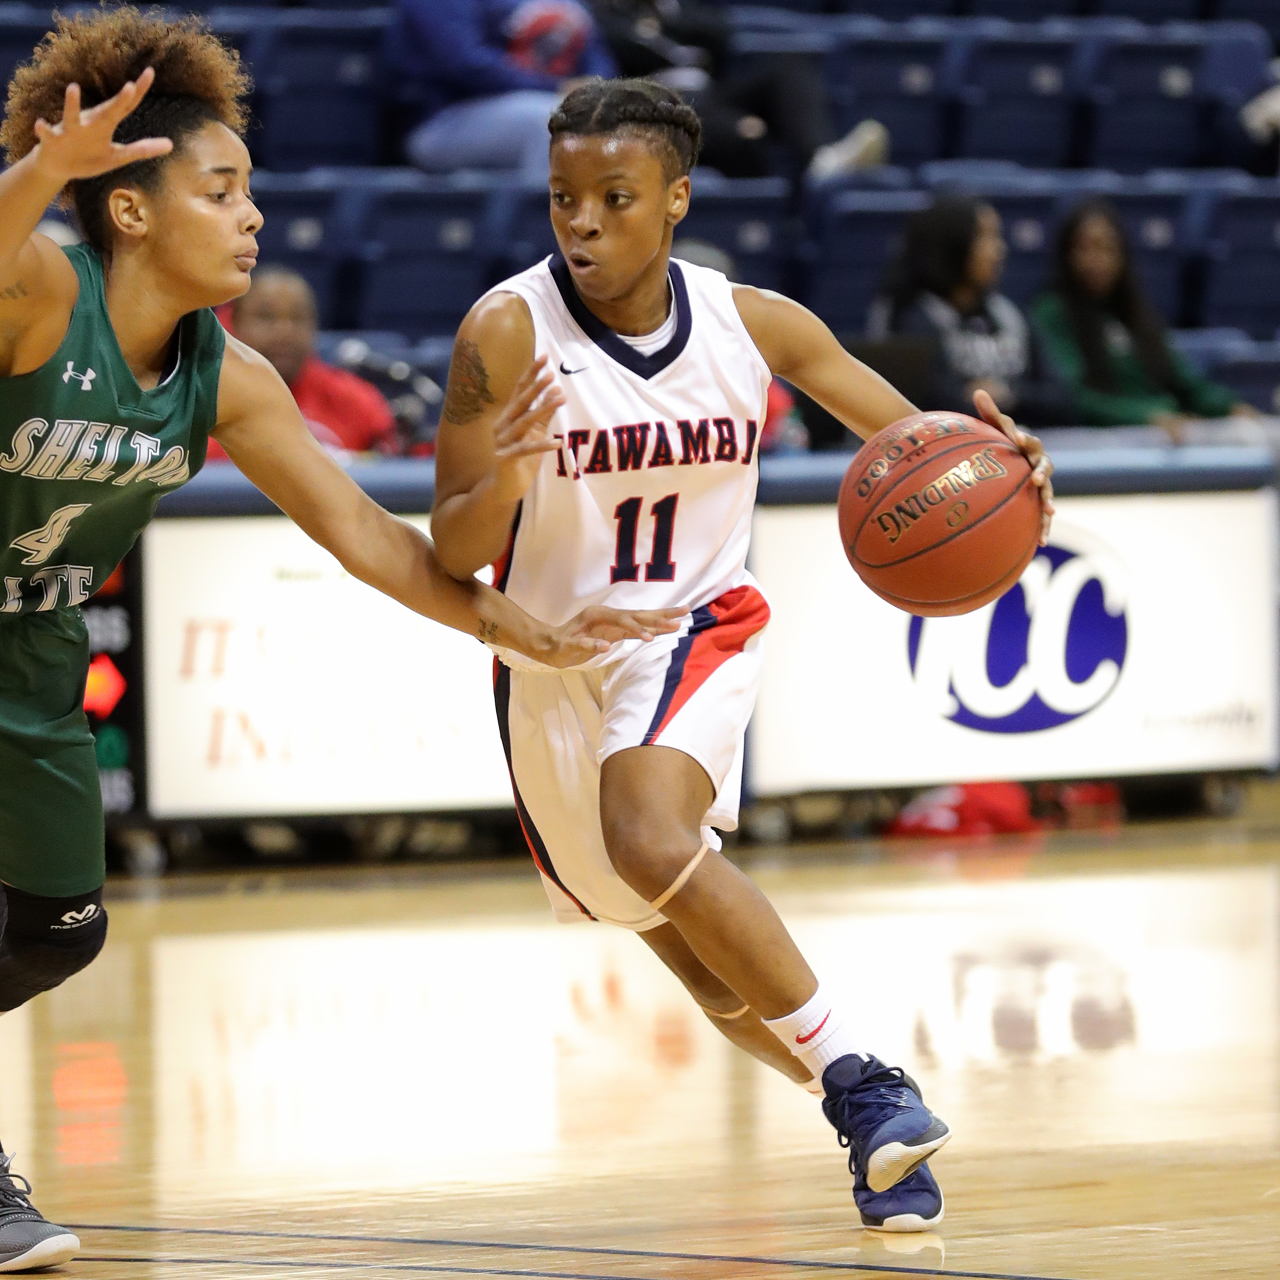 Lady Indians take No. 6 Shelton State to the limit